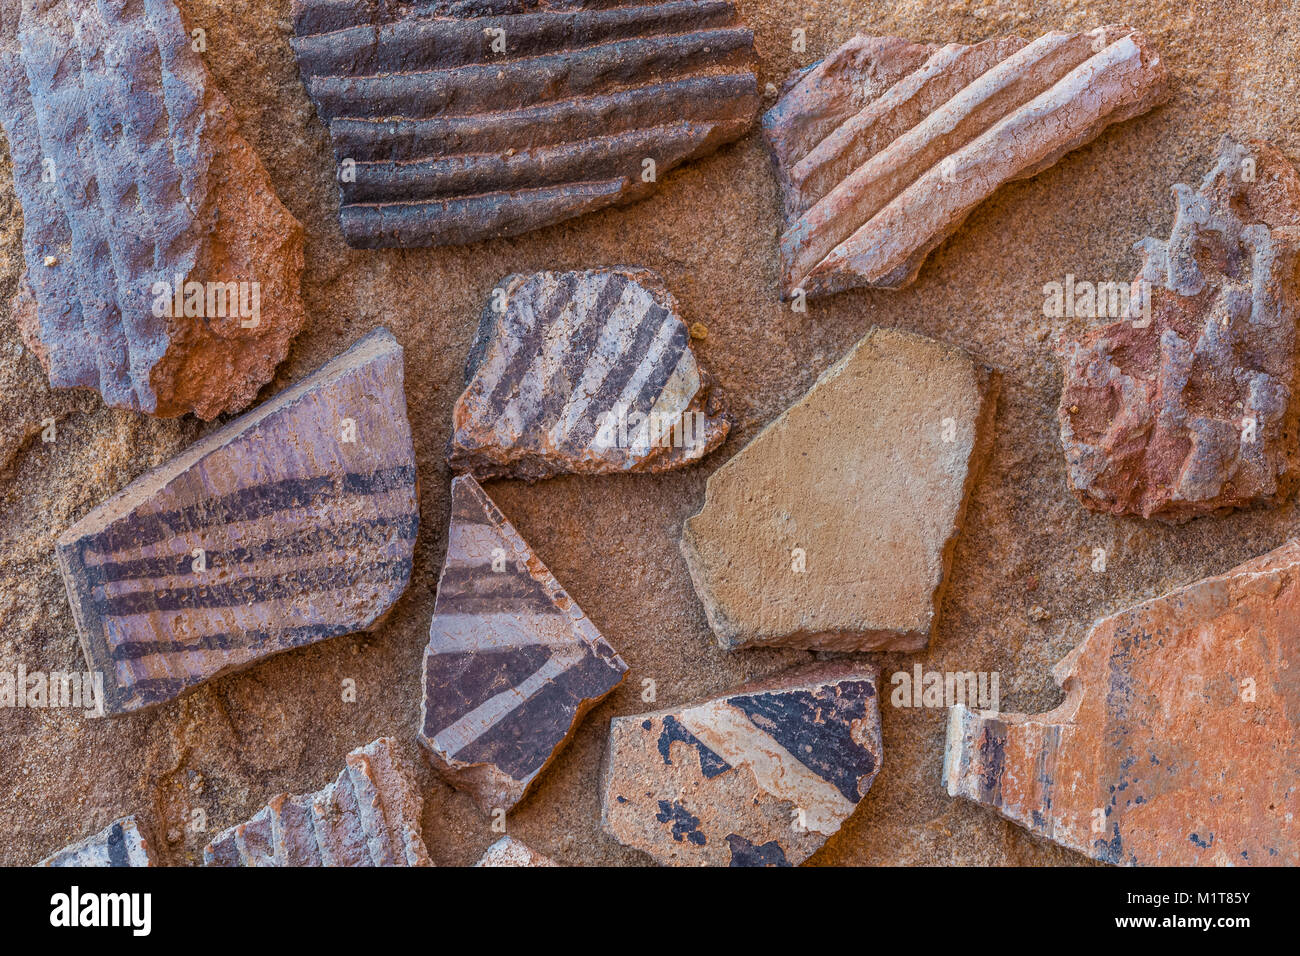 Potsherds left by the Ancestral Puebloan people living at Big Ruin within Salt Creek Canyon in The Needles District of Canyonlands National Park, Utah Stock Photo